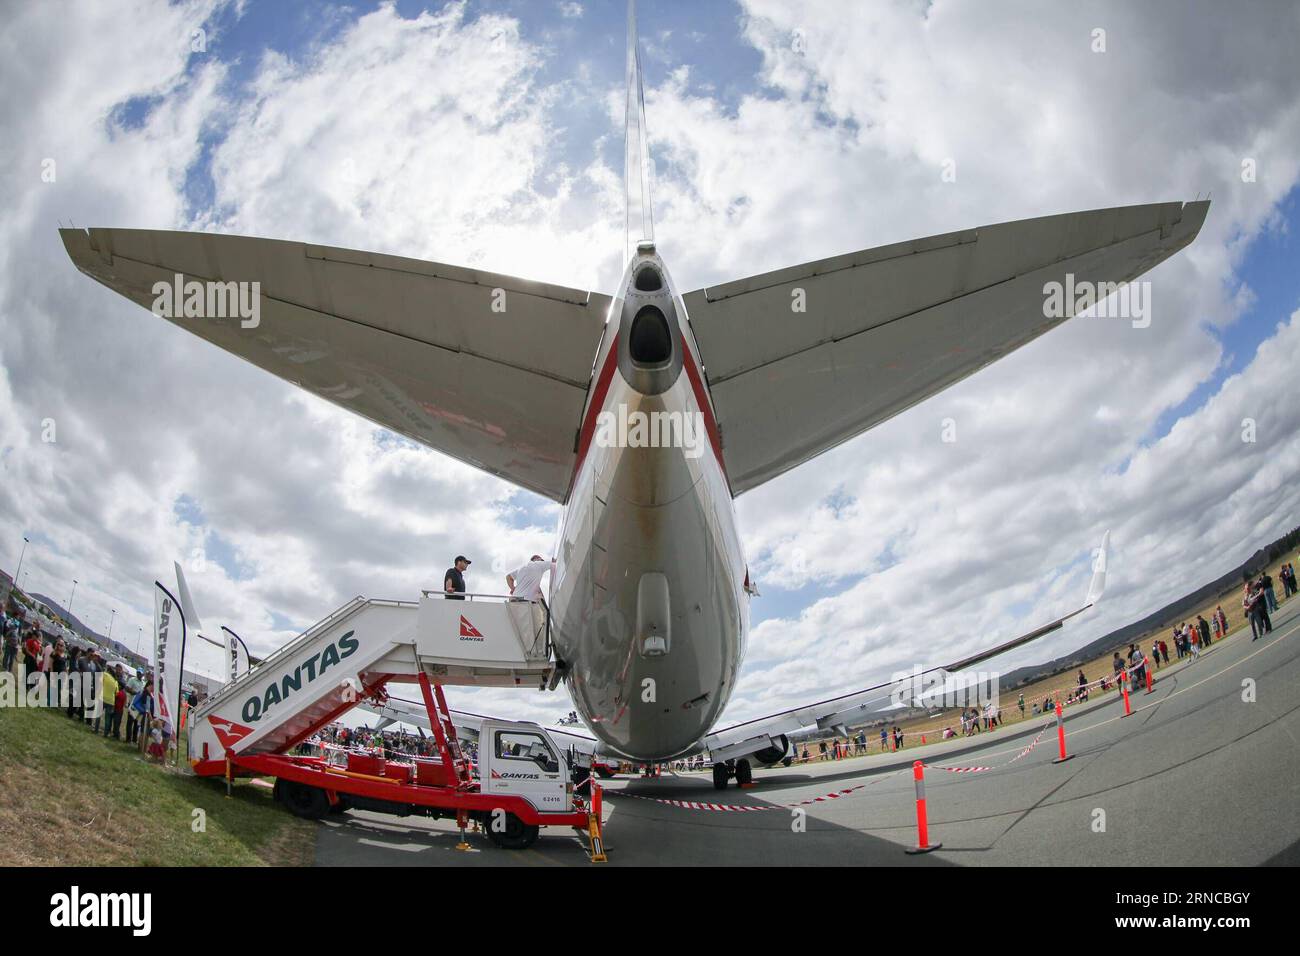 (160403) -- CANBERRA, April 3, 2016 -- Photo taken on April 3, 2016 shows a Qantas Airline aircraft on display during the Canberra Airport Open Day in Canberra, Australia. ) AUSTRALIA-CANBERRA-AIRPORT-OPEN DAY JustinxQian PUBLICATIONxNOTxINxCHN   Canberra April 3 2016 Photo Taken ON April 3 2016 Shows a Qantas Airline Aircraft ON Display during The Canberra Airport Open Day in Canberra Australia Australia Canberra Airport Open Day JustinxQian PUBLICATIONxNOTxINxCHN Stock Photo